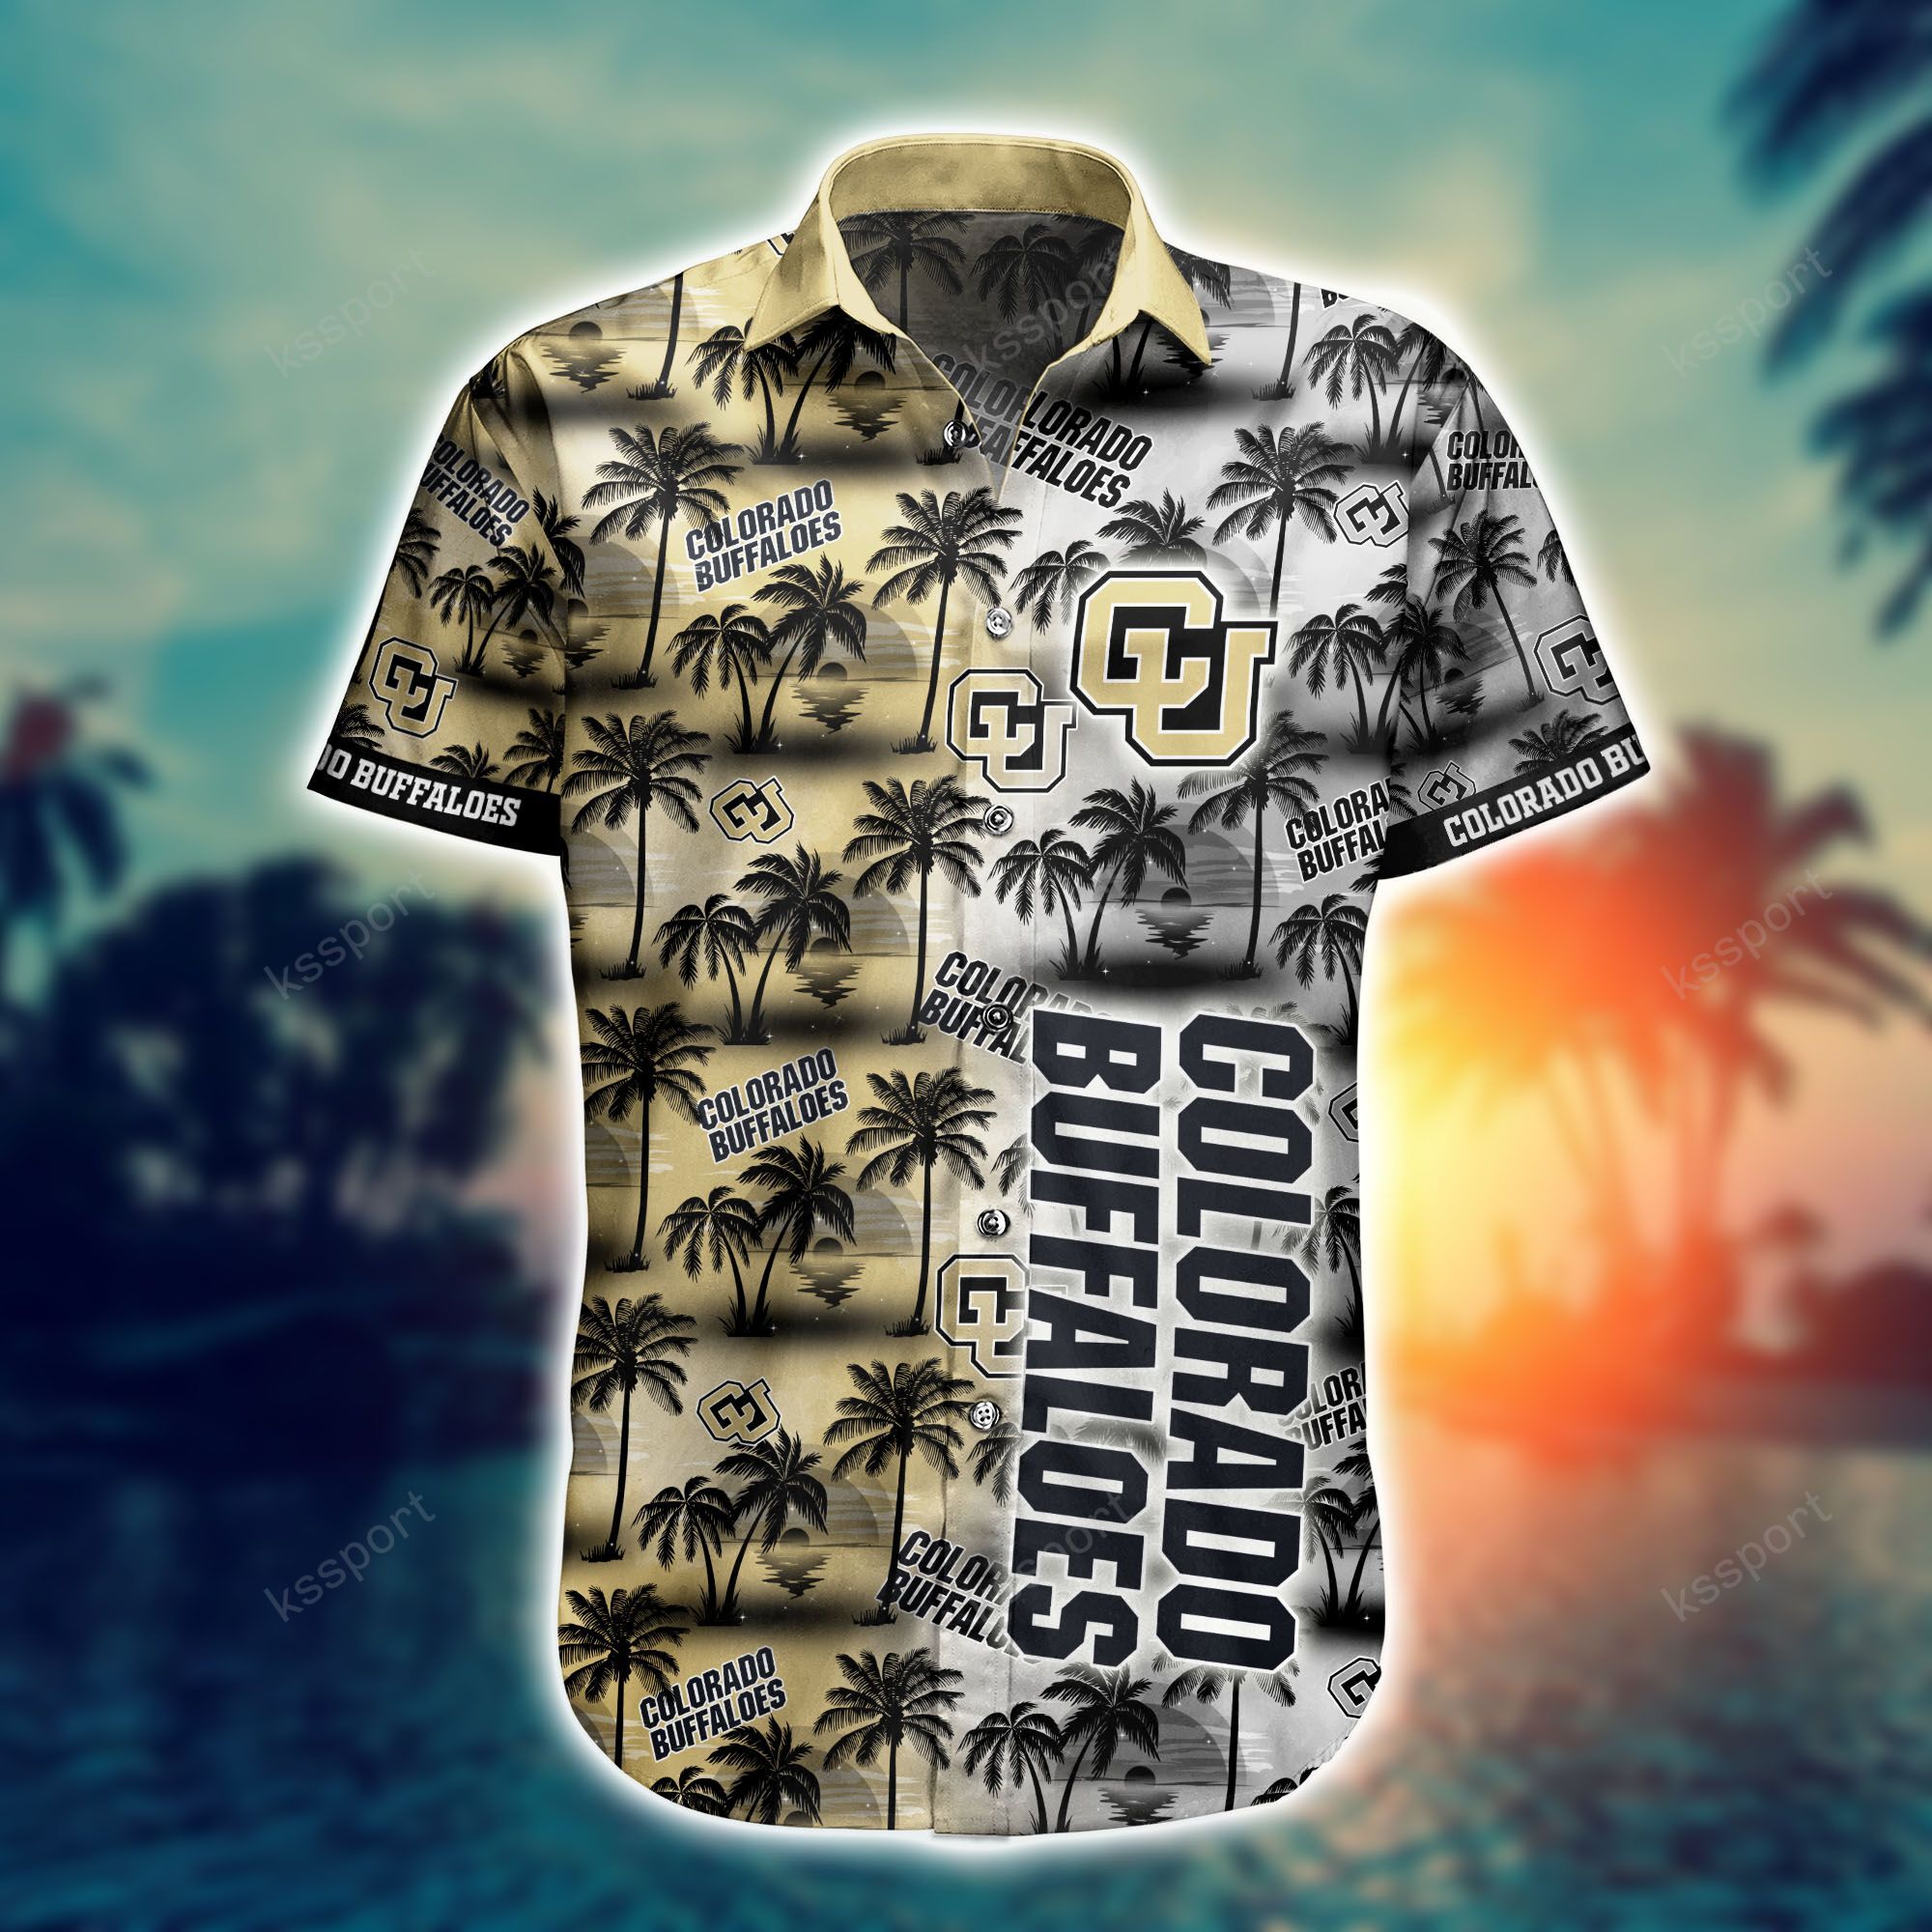 Top cool Hawaiian shirt 2022 - Make sure you get yours today before they run out! 130